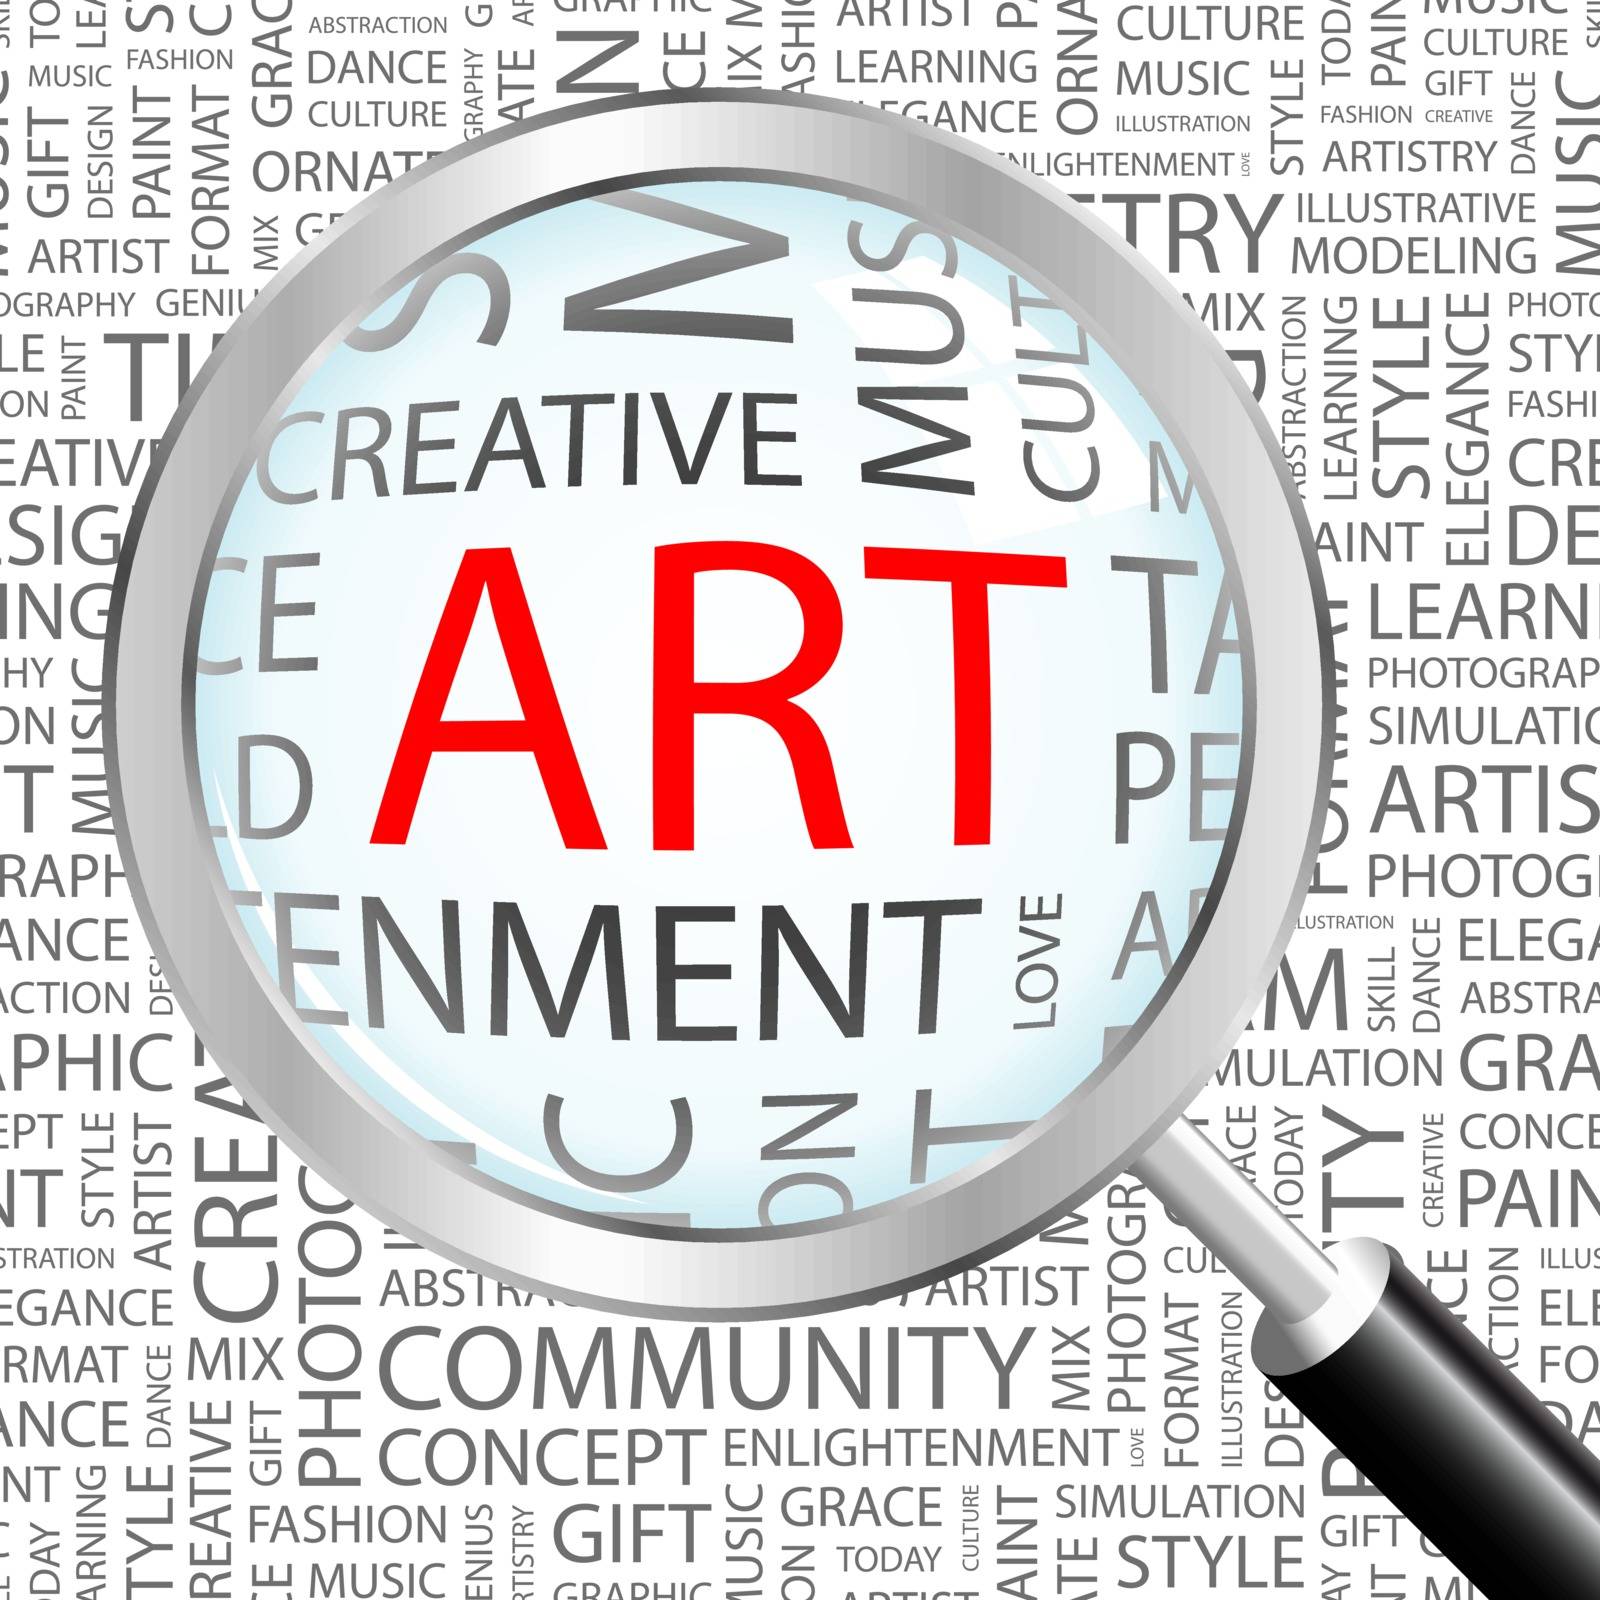 ART. Concept illustration. Graphic tag collection. Wordcloud collage.